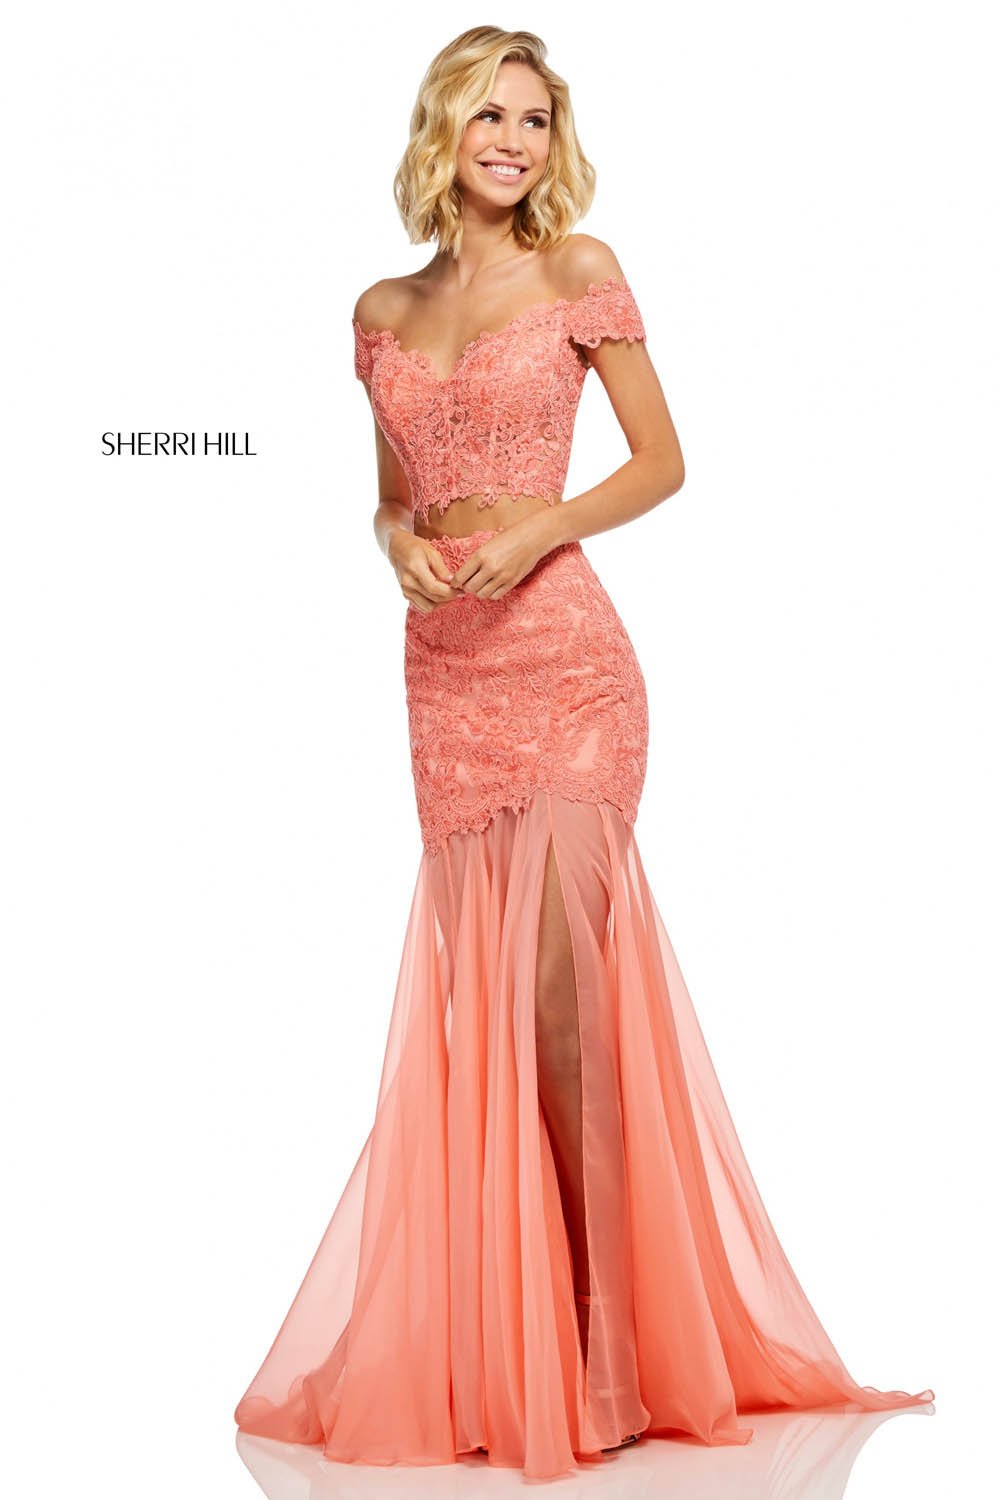 Sherri Hill 52719 dress images in these colors: Ivory, Black, Light Blue, Red, Yellow, Light Coral, Coral, Navy, Blush.